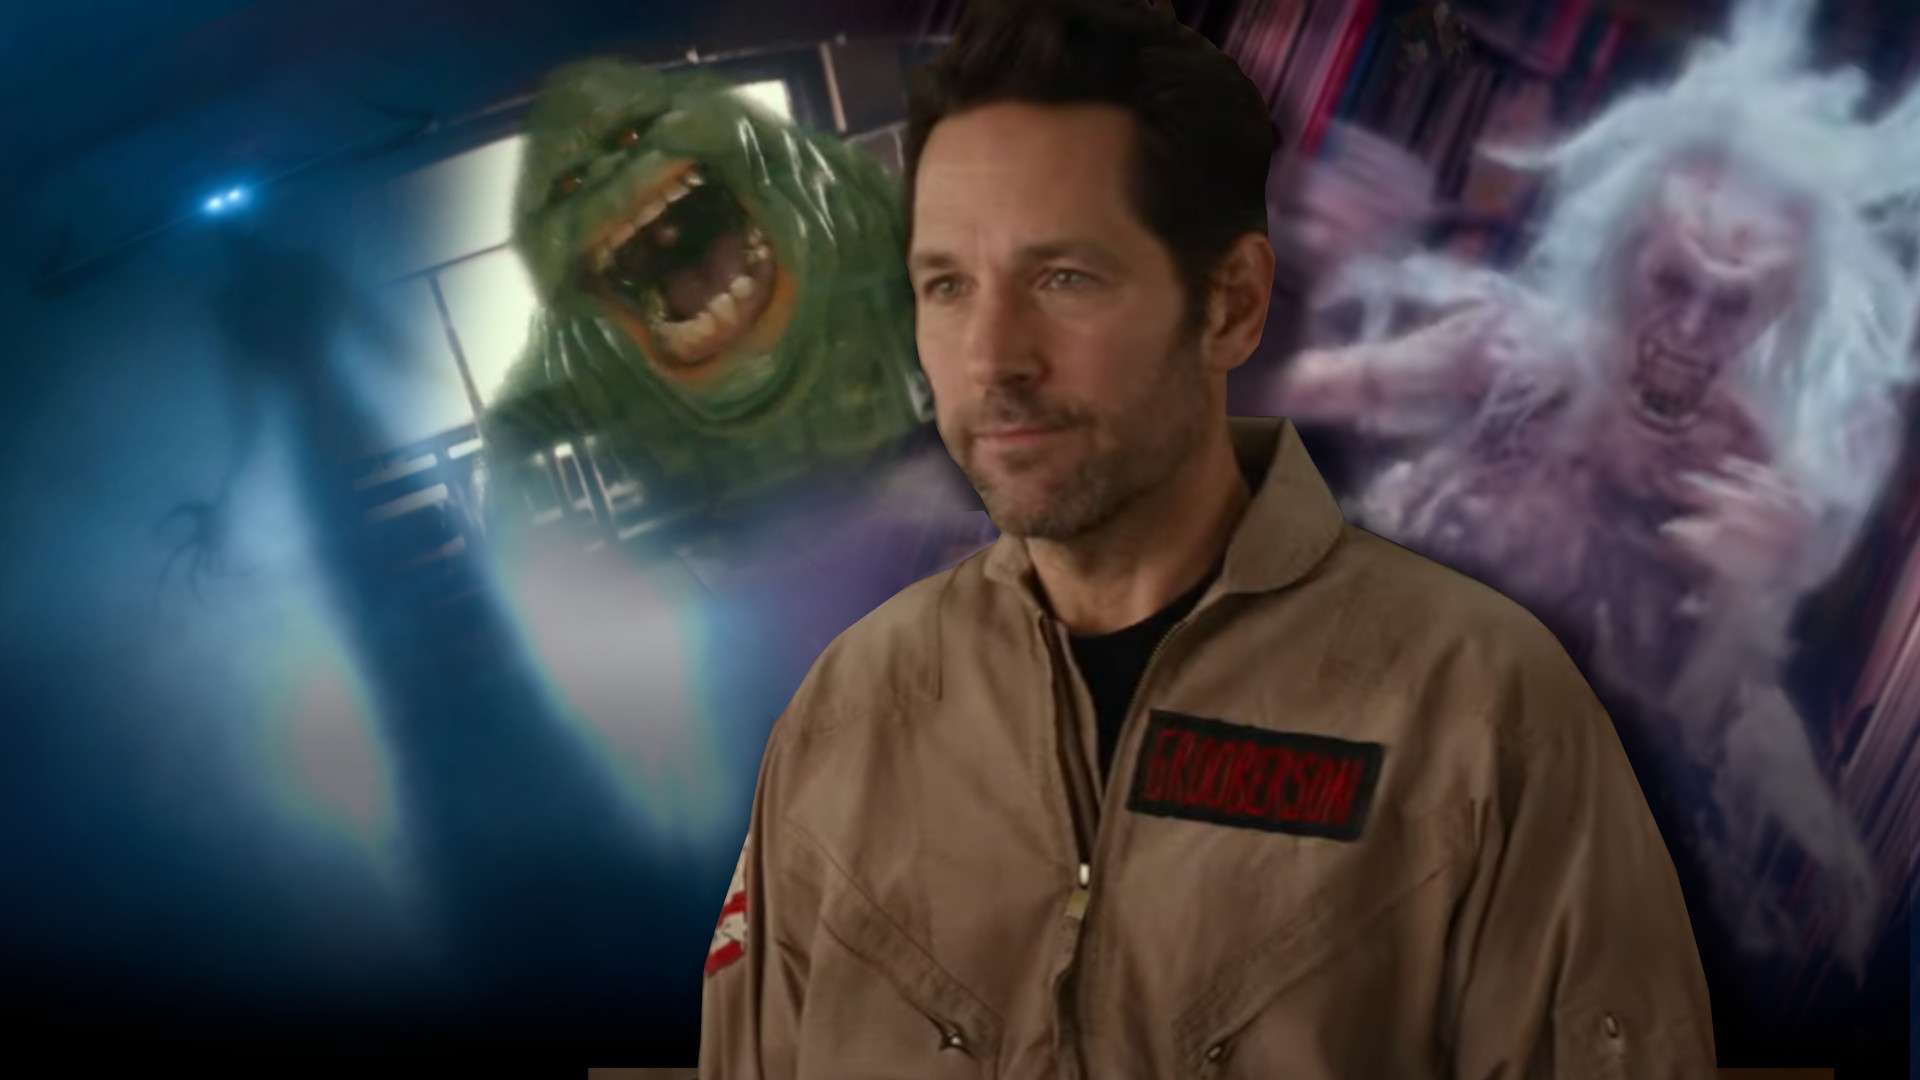 Paul Rudd stands in front of three ghosts from Ghostbusters: Frozen Empire